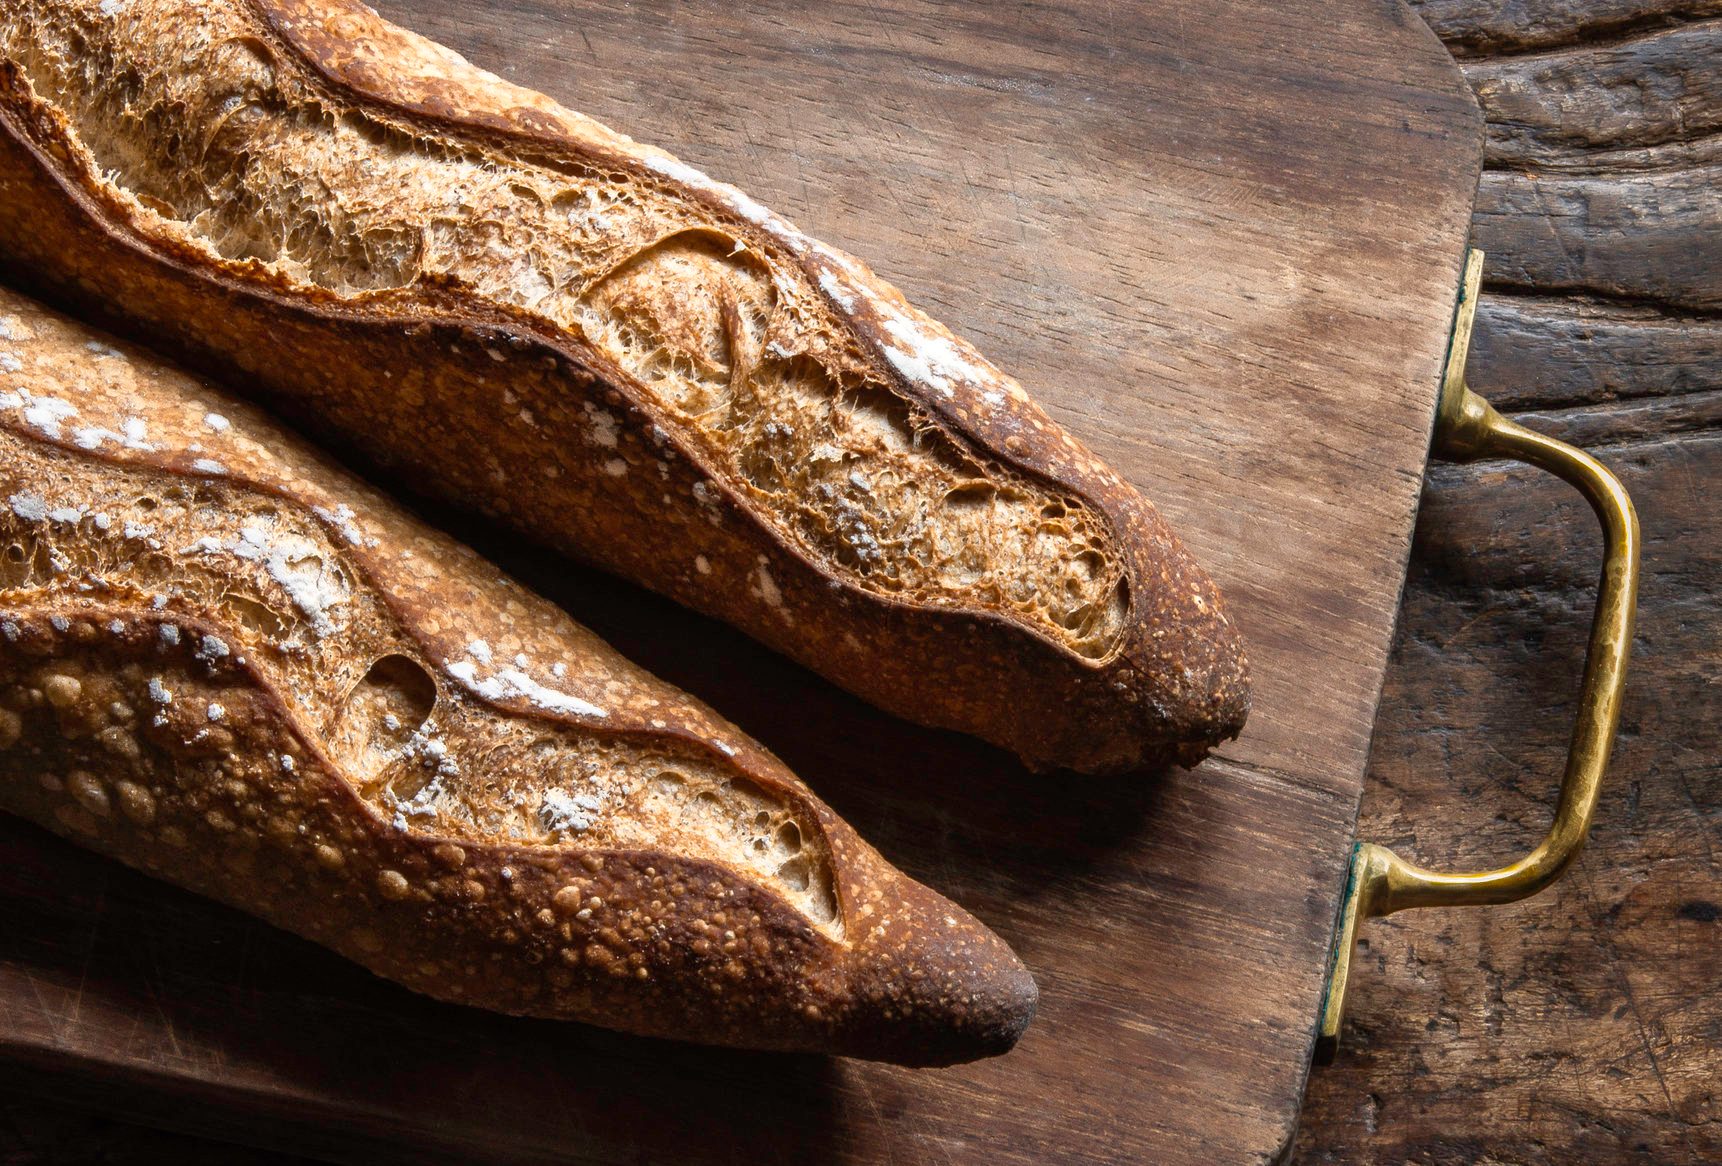 Vegan Bread Is Delicious, and Here's How to Buy, Make, and Eat It